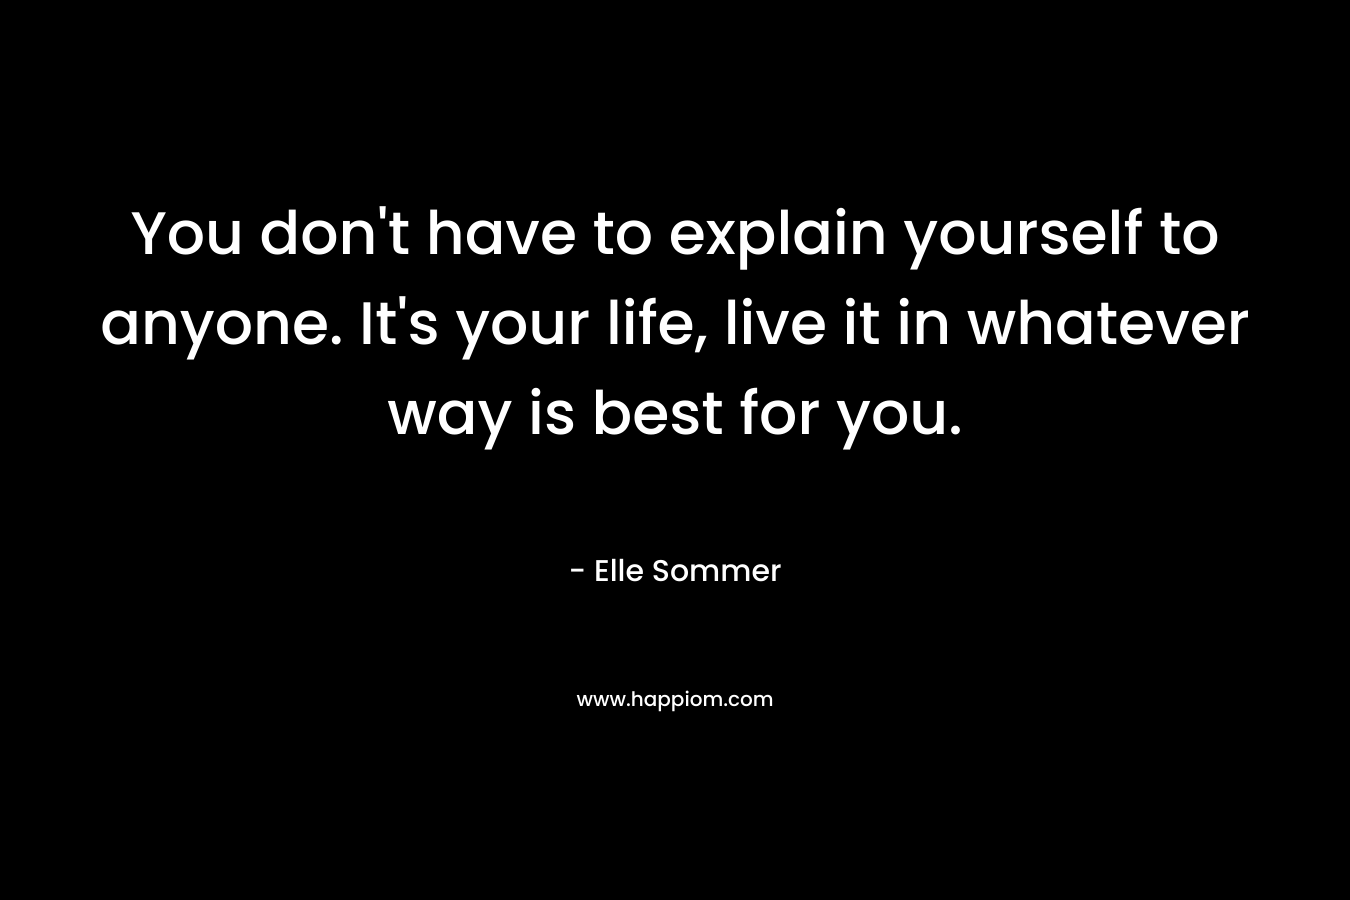 You don’t have to explain yourself to anyone. It’s your life, live it in whatever way is best for you. – Elle Sommer